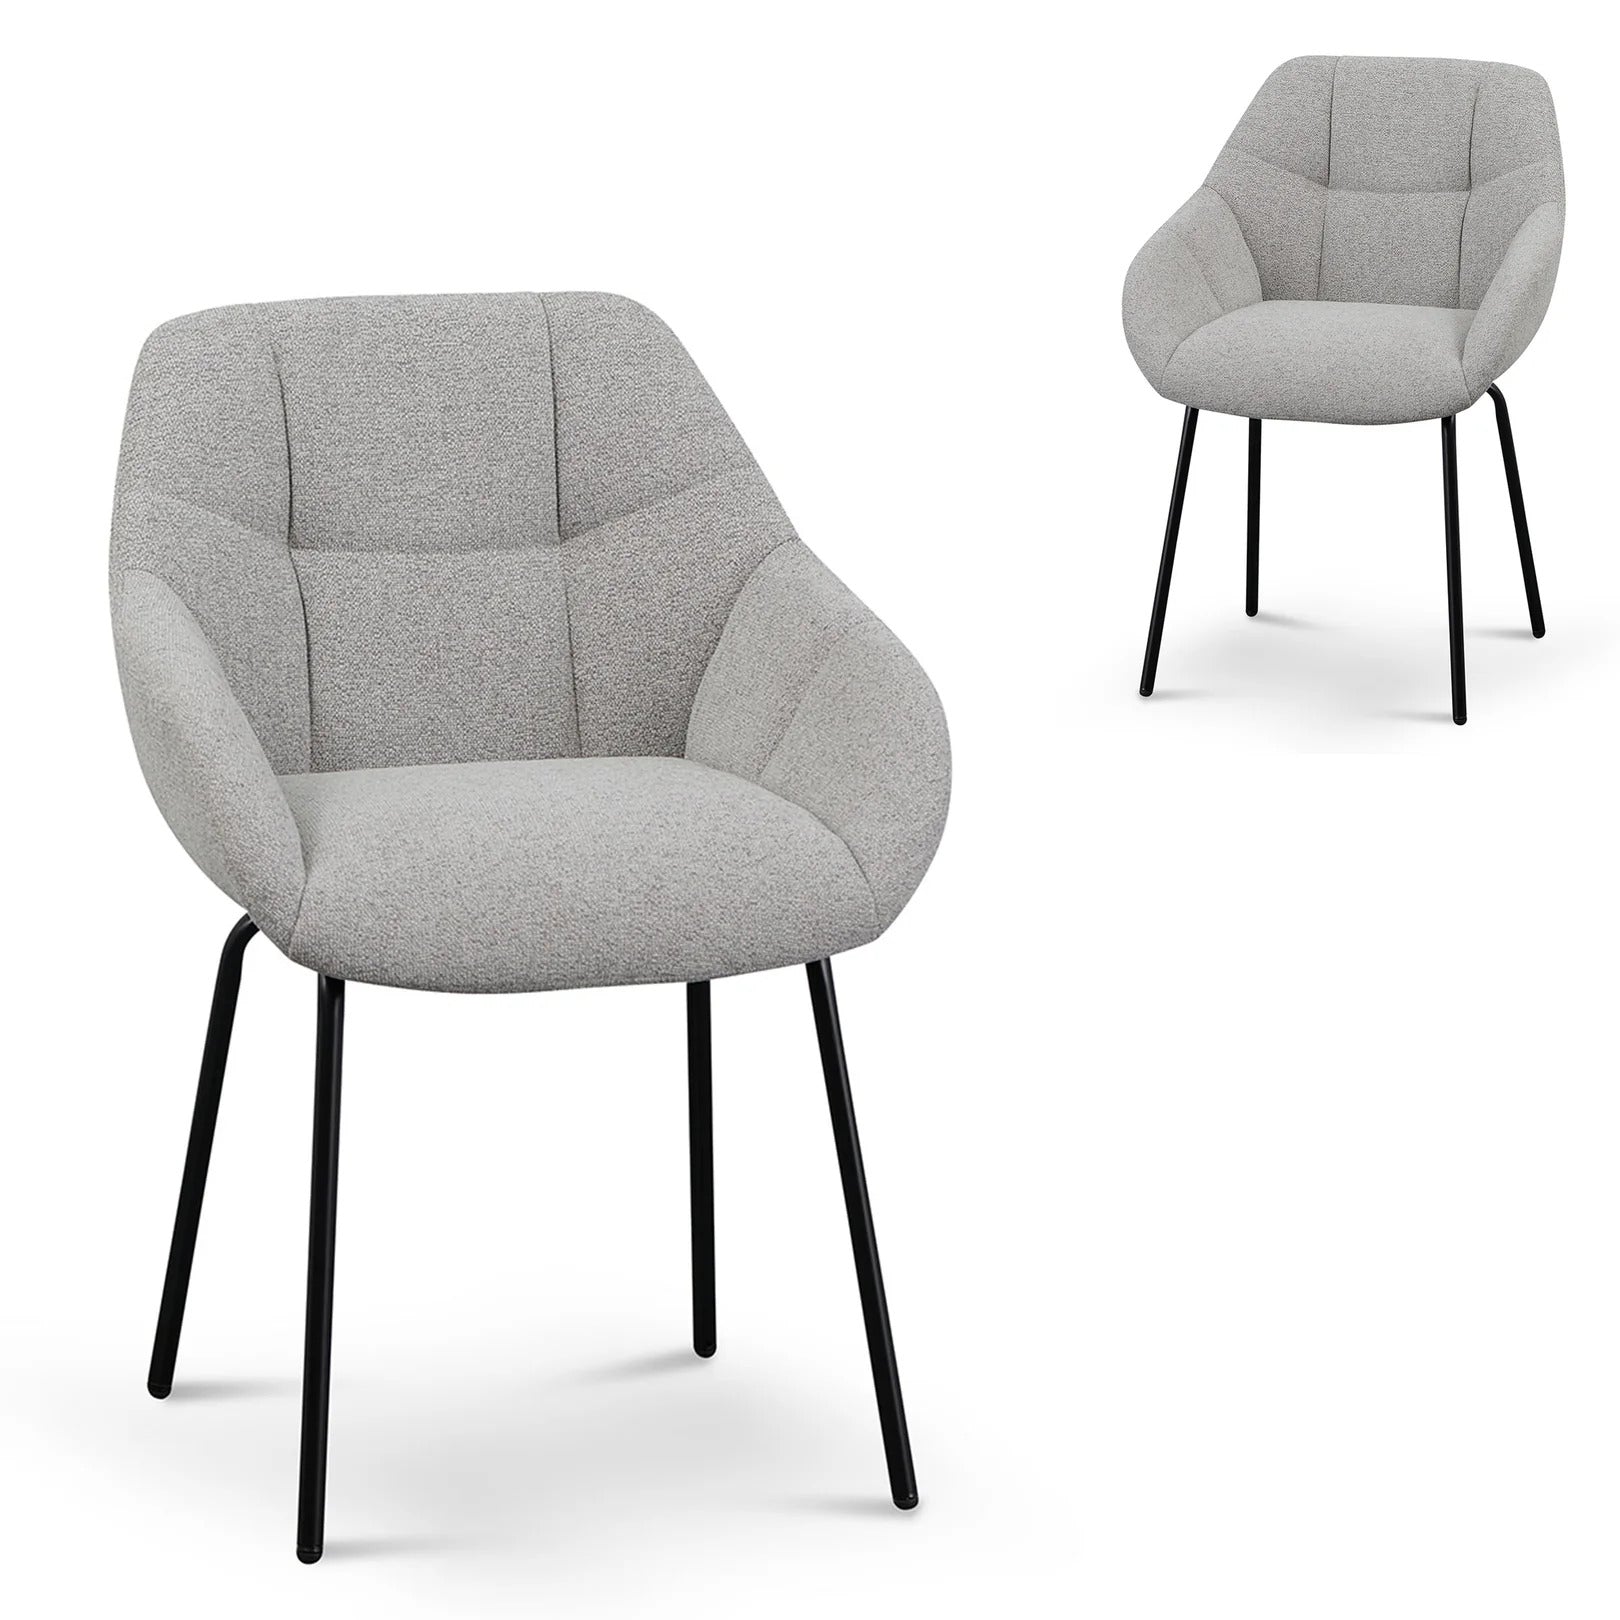 Set of 2 Markie Fabric Dining Chair - Spec Grey - Dining Chairs